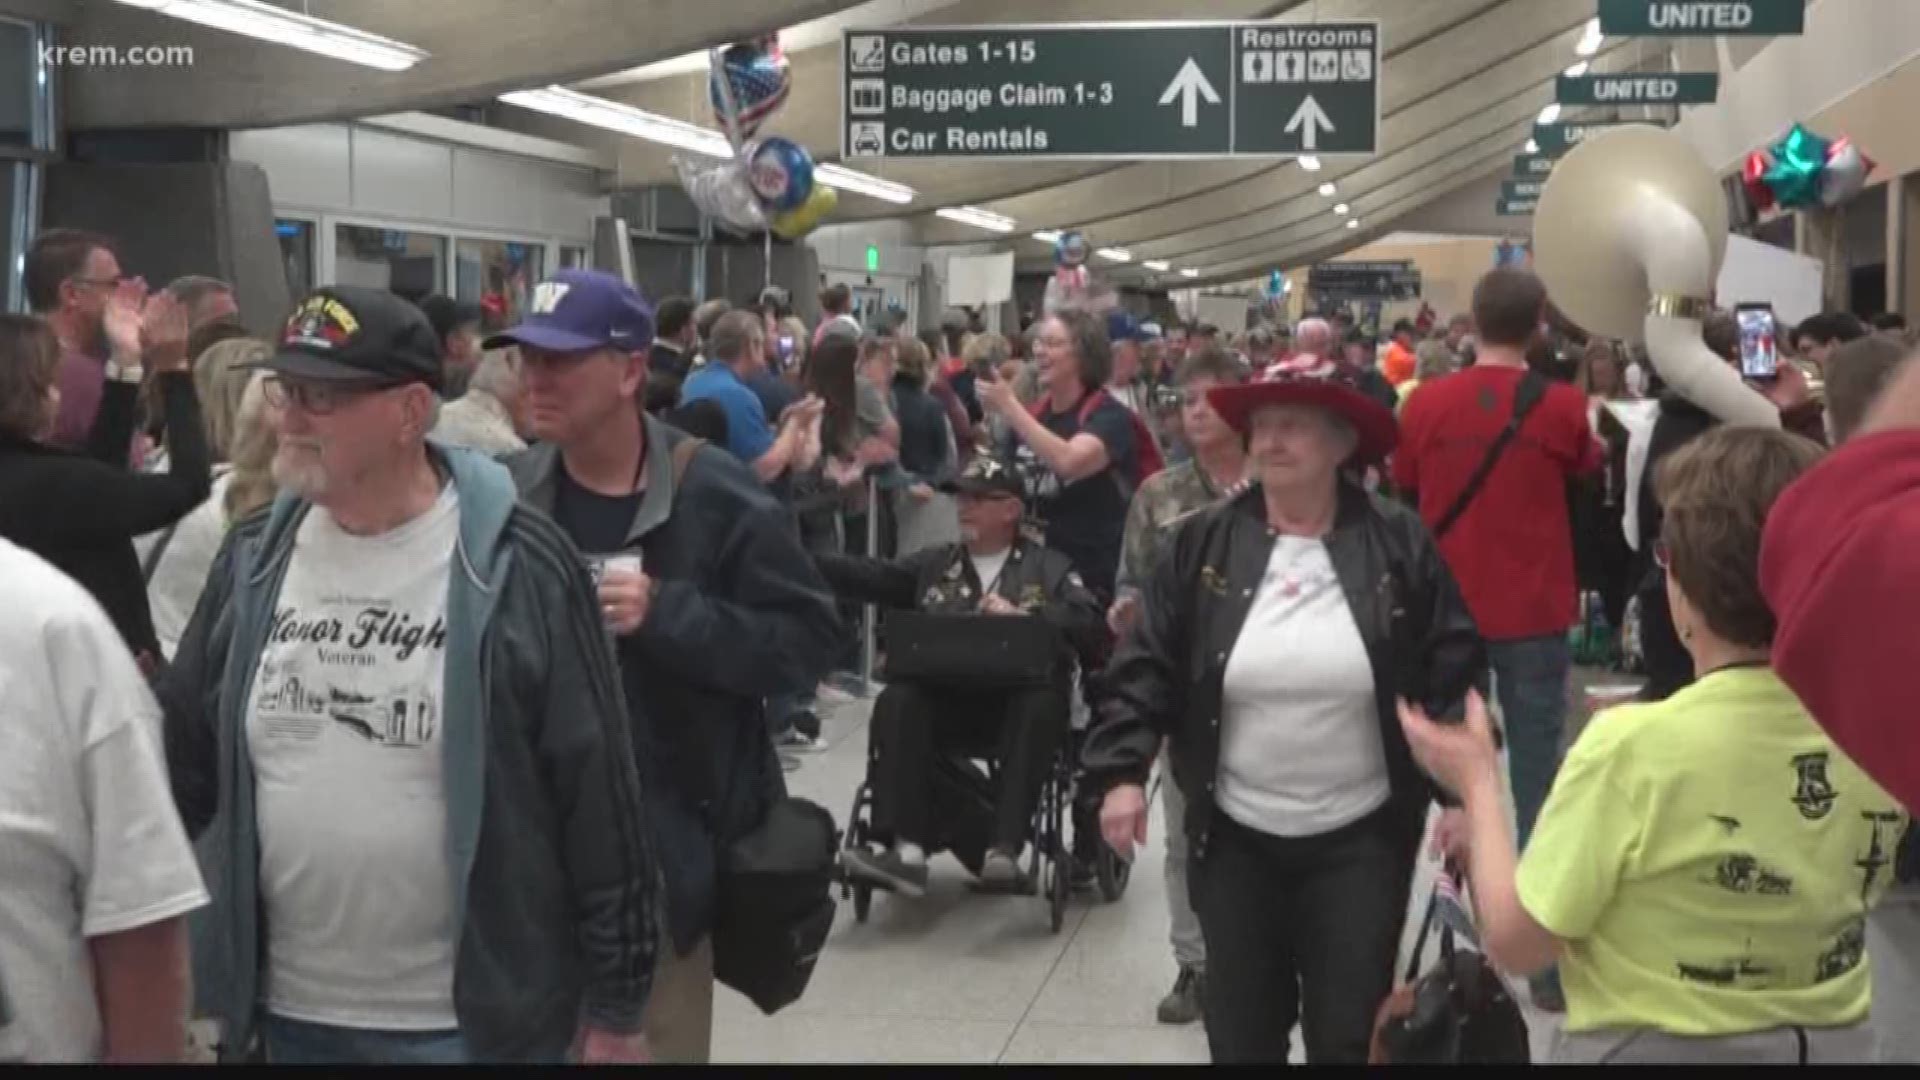 Hundreds showed up at the GEG terminal to cheer for veterans returning from their trips to D.C. memorials.